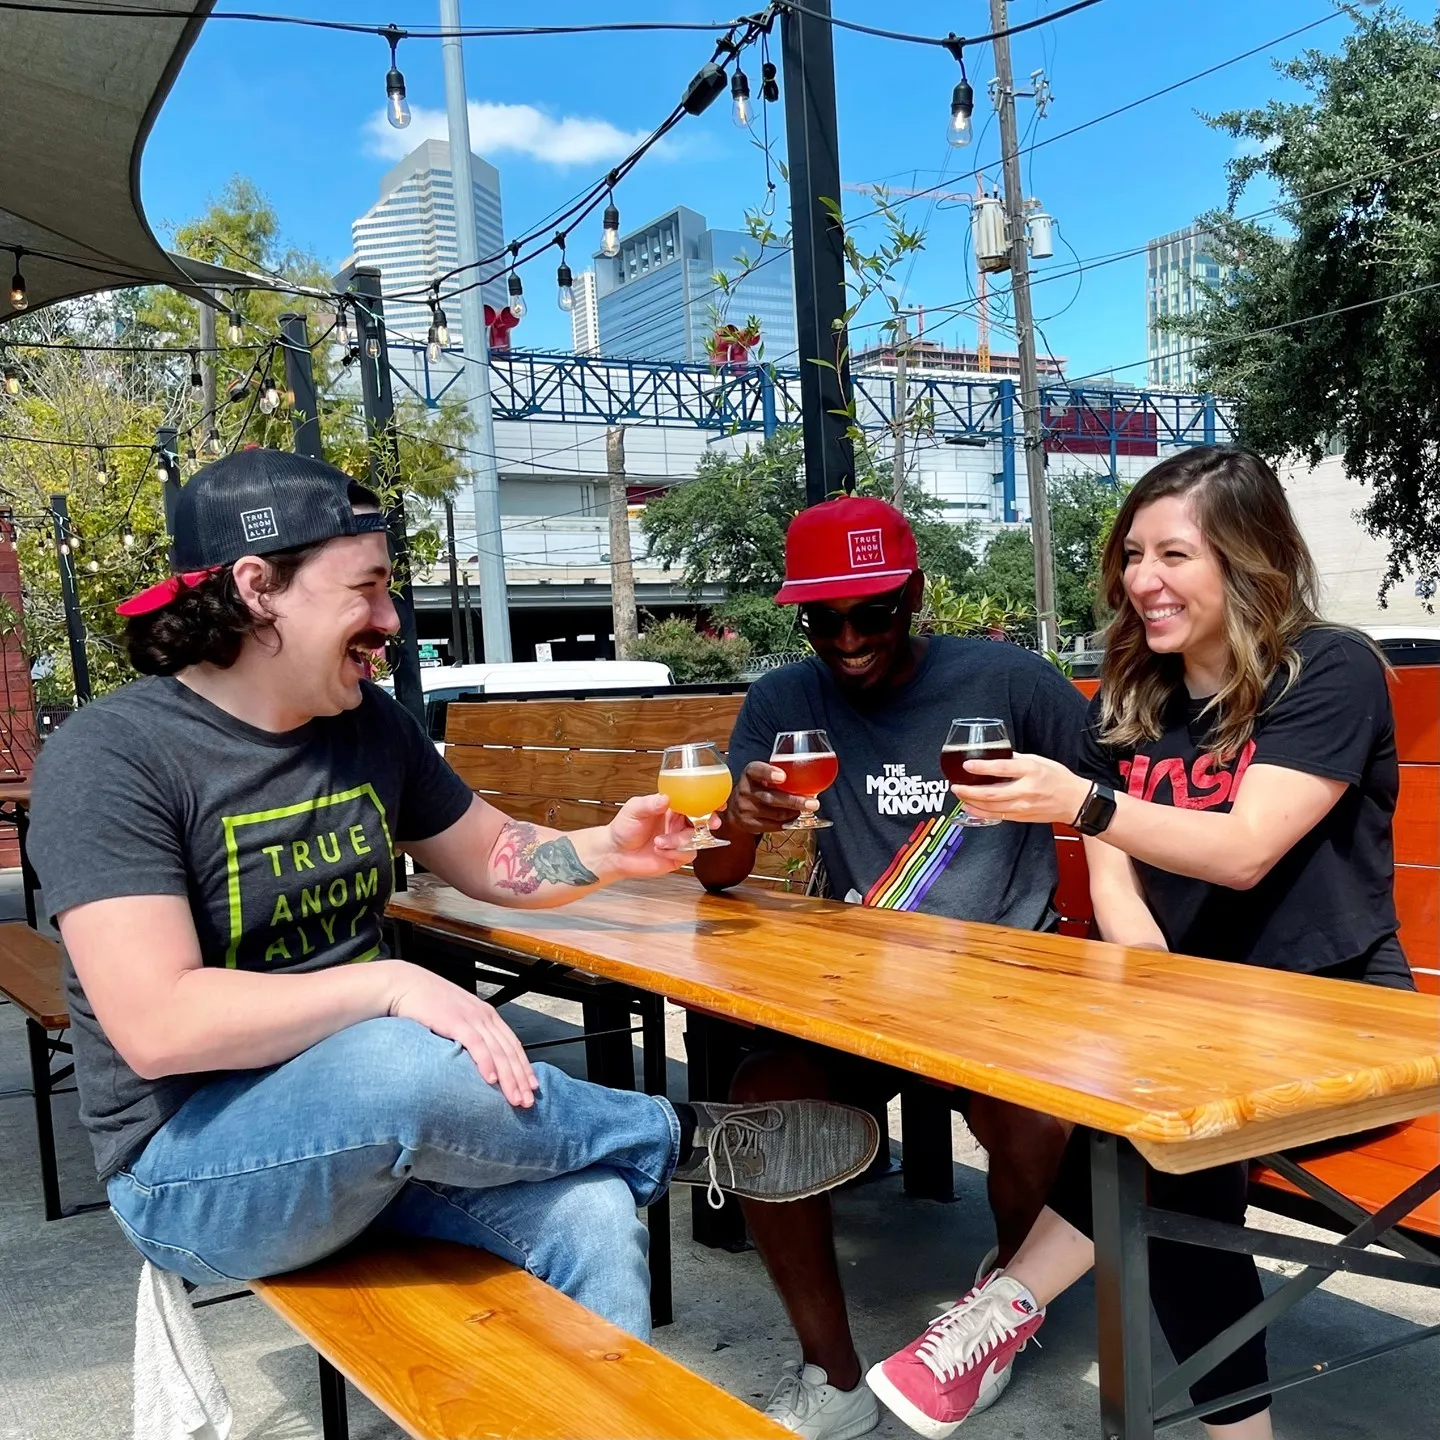 Three young adults cheers their beers at a wooden picnic table underneath string lights with the Houston skyline on a clear sky day in the background. Photo via Instagram user @trueanomalybrewing